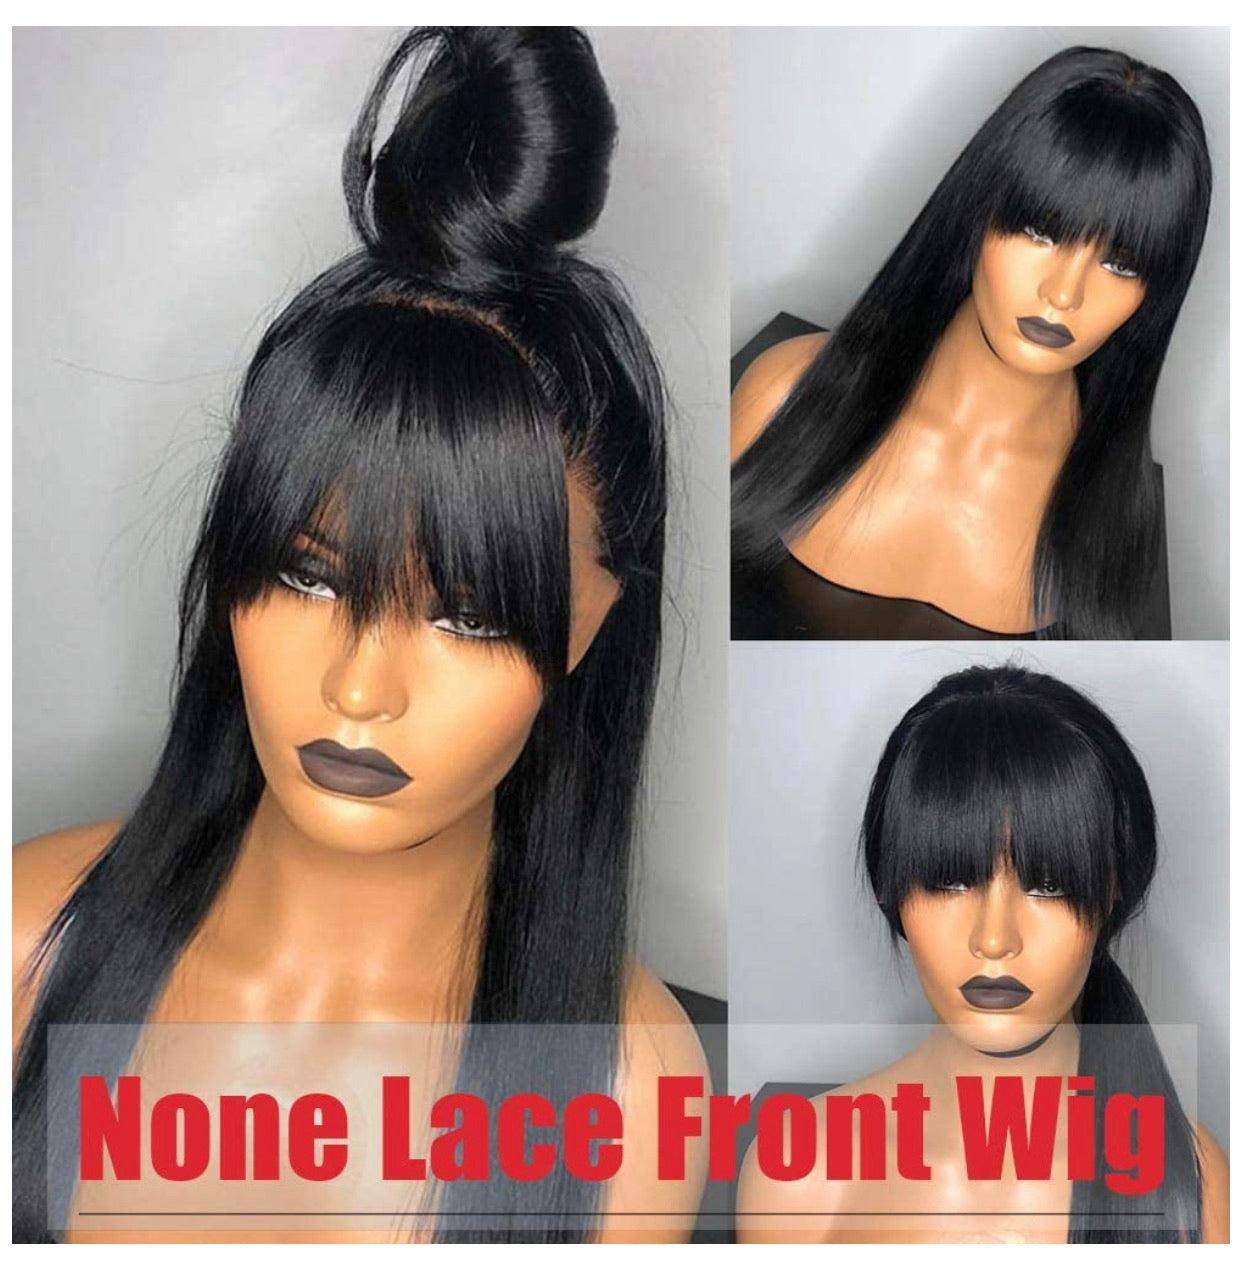 Straight Human Hair Wigs with Bangs (26inch) 9A None Lace Front Wigs Human Hair for Women Natural Black 150% Density Glueless Machine Made Brazilian Remy Hair..